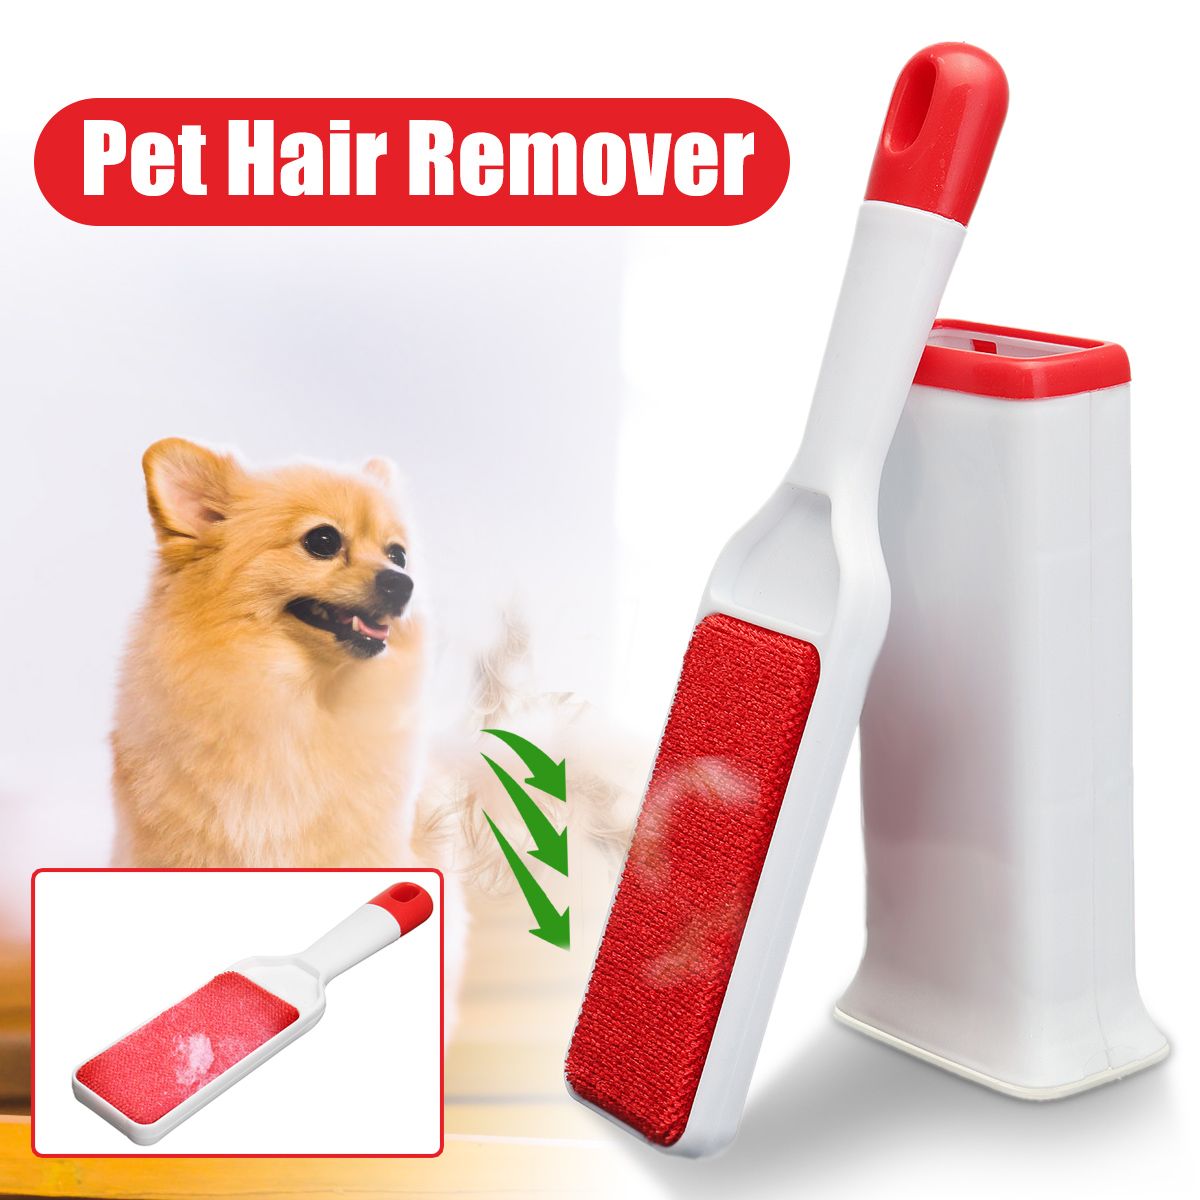 Pet-Hair-Remover-Self-cleaning-Cat-Dog-Lint-Fur-Clothes-Cleaner-Cleaning-Brush-1579822